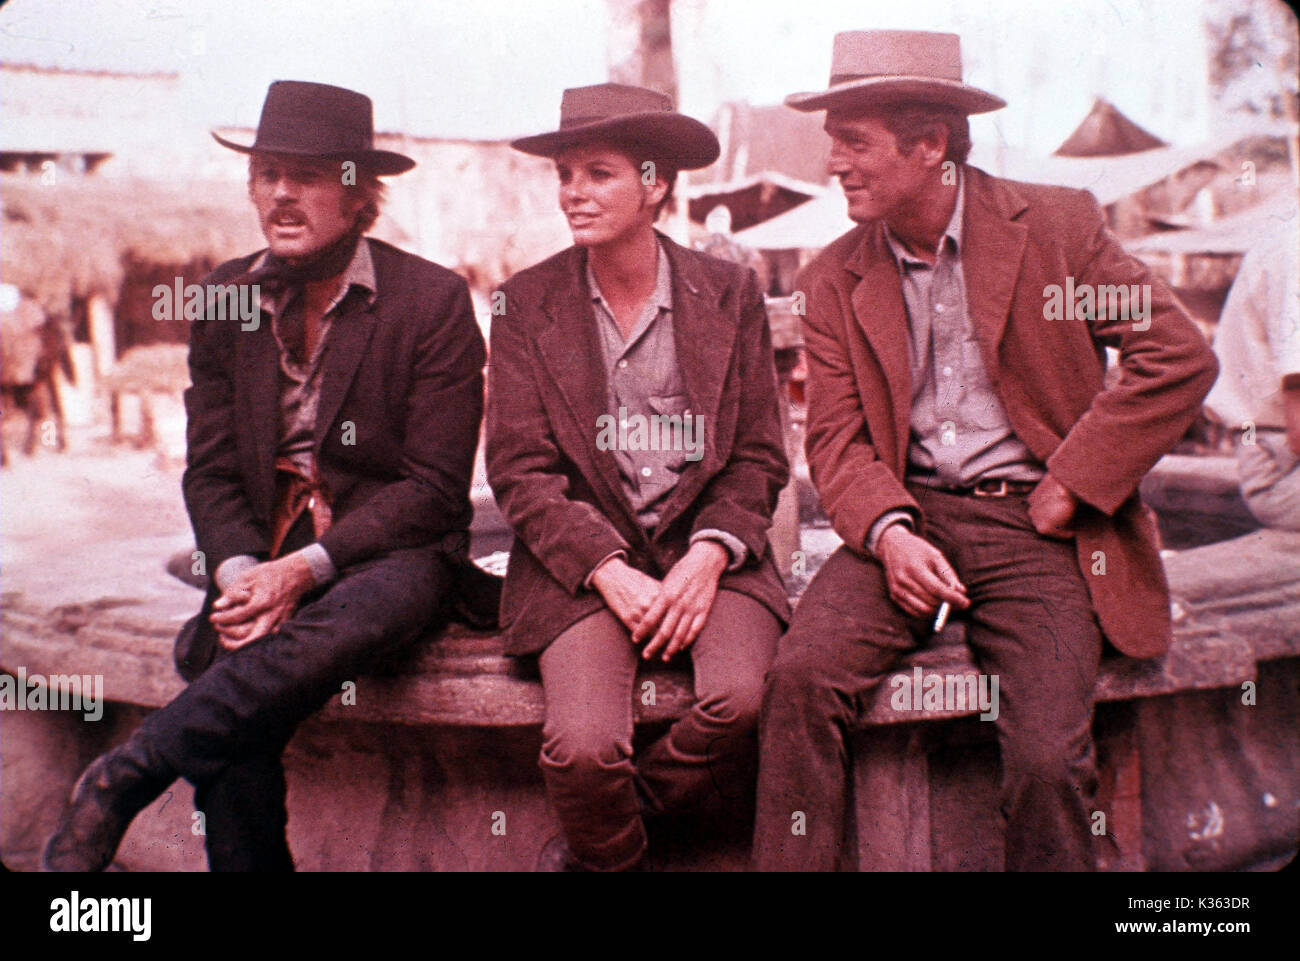 BUTCH CASSIDY AND THE SUNDANCE KID L-R, ROBERT REDFORD, KATHARINE ROSS, PAUL NEWMAN Stock Photo